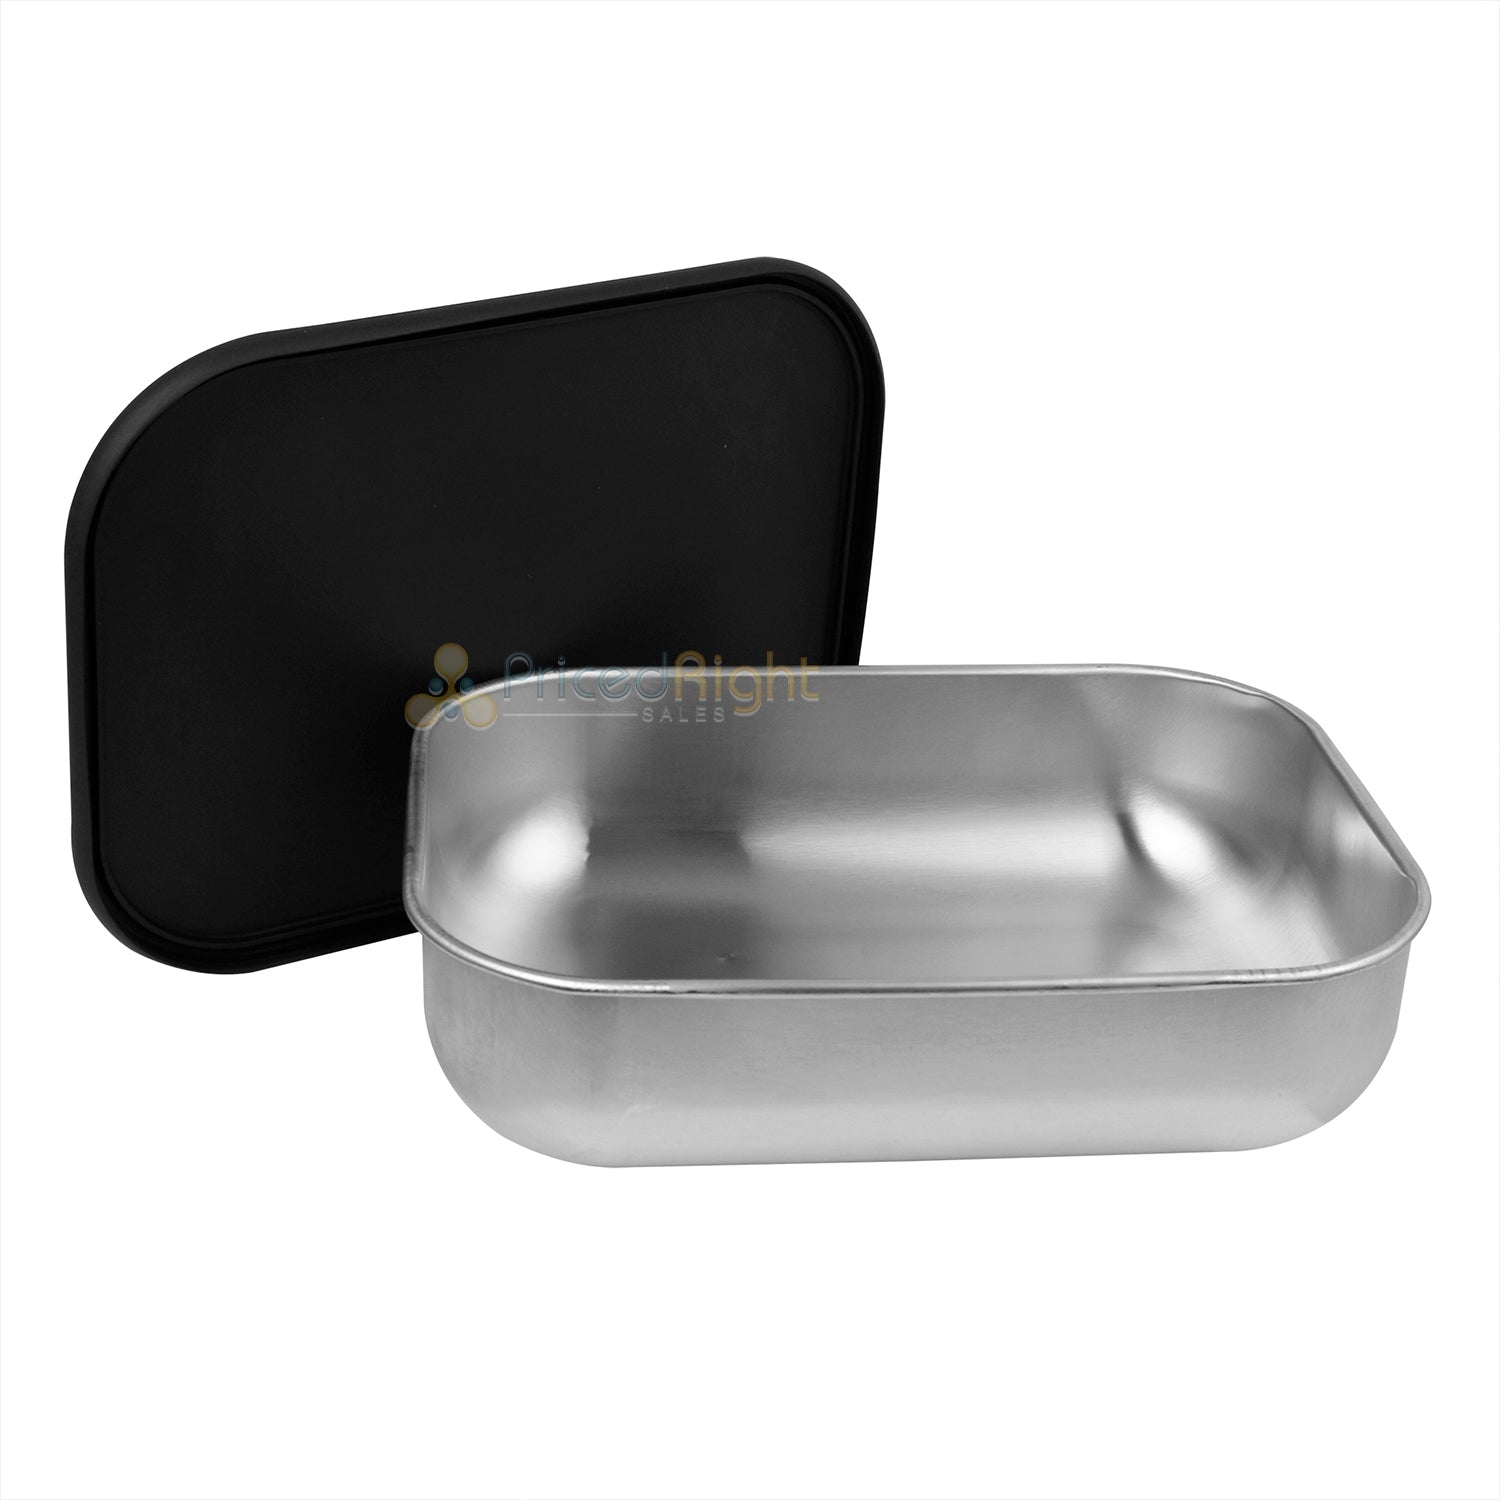 Razor 3-In-1 Griddle Dome Container Stainless Steel With Silicone Lid & Handle